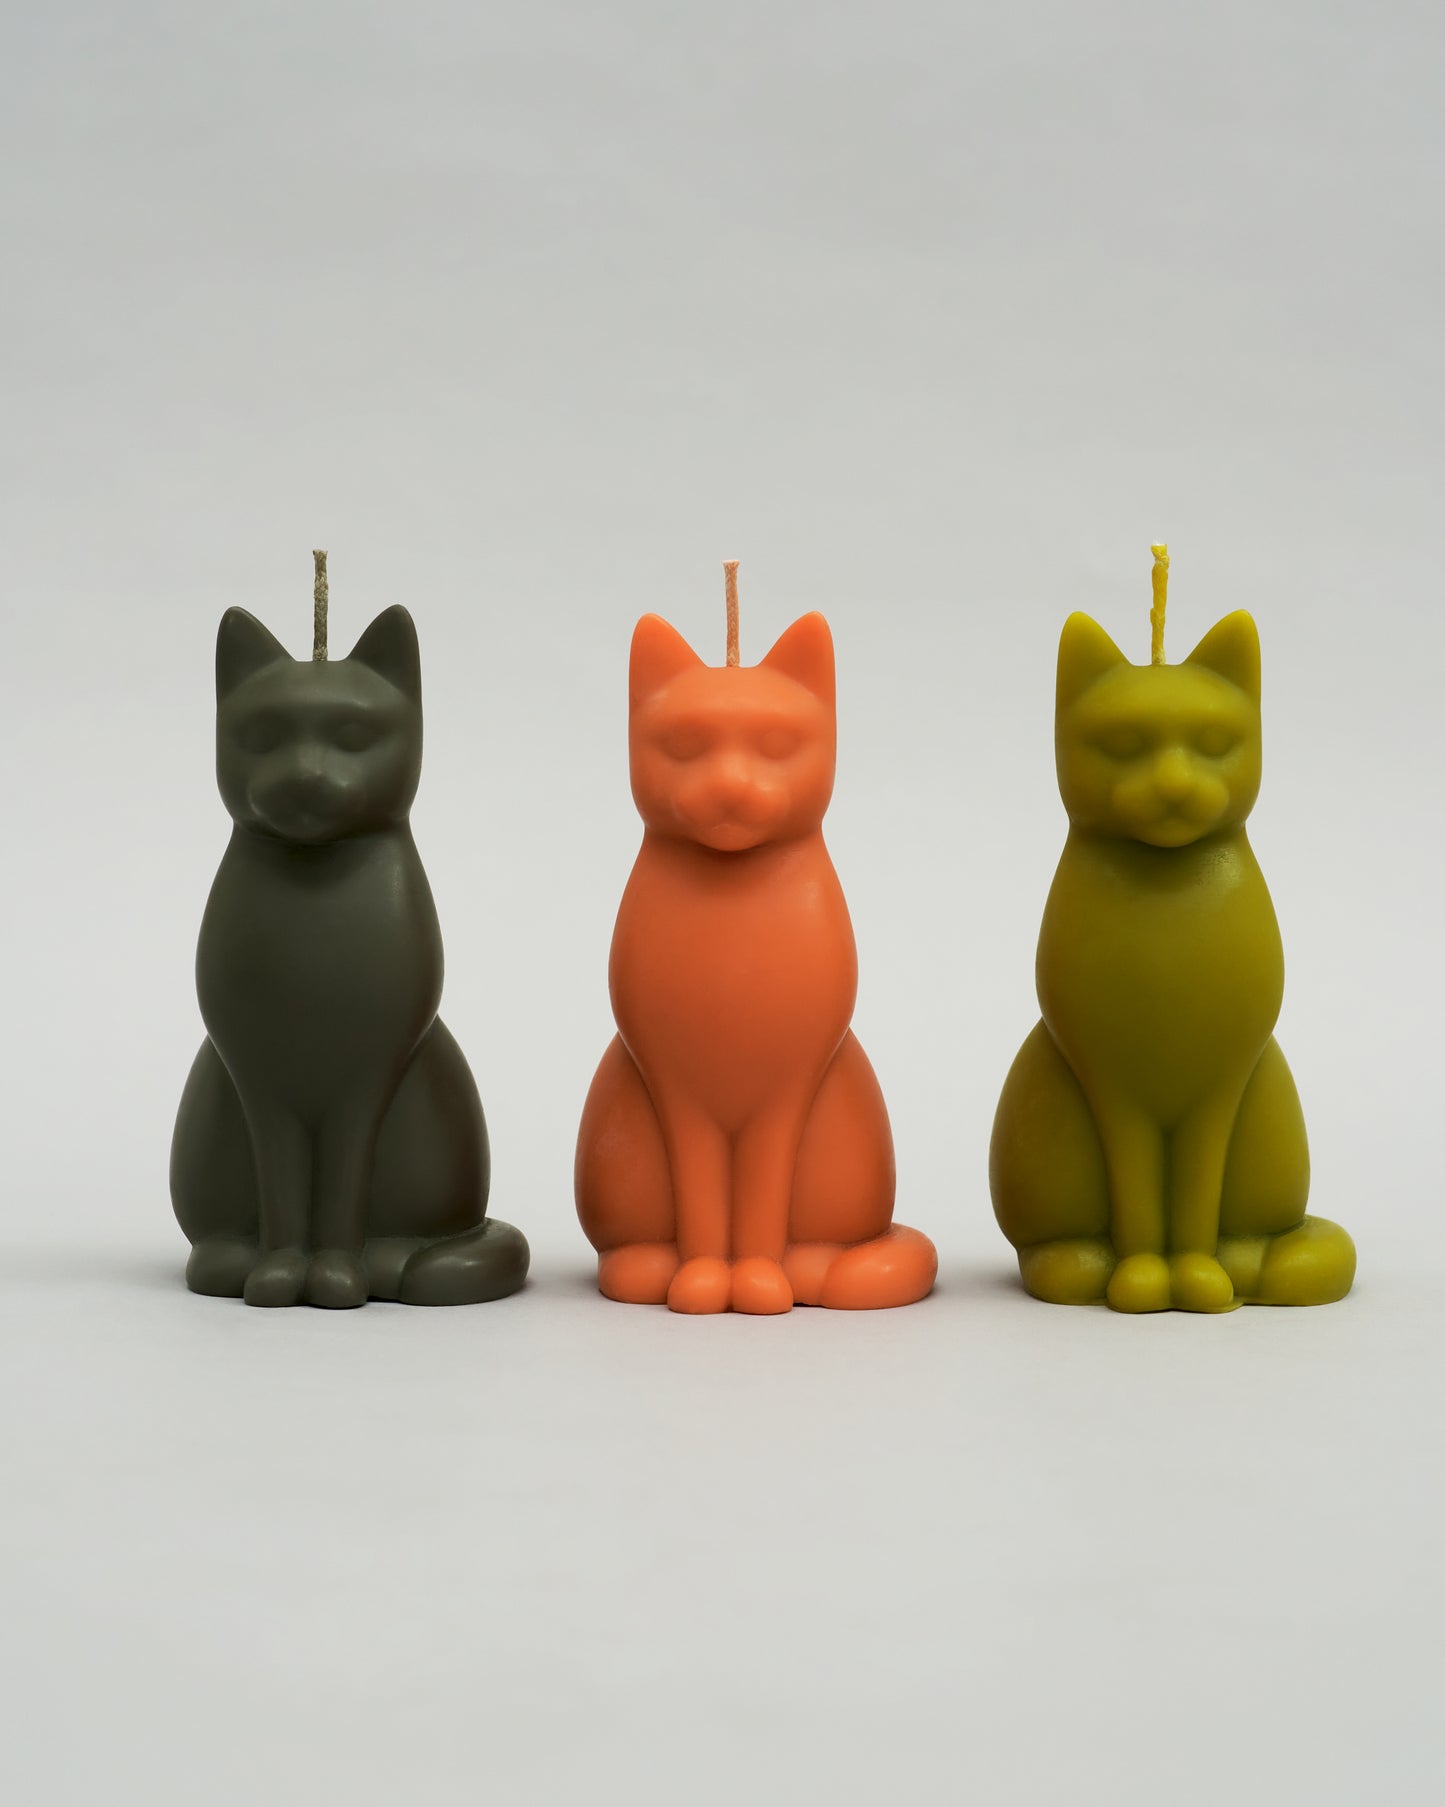 Cat Candle in "Nosyk"